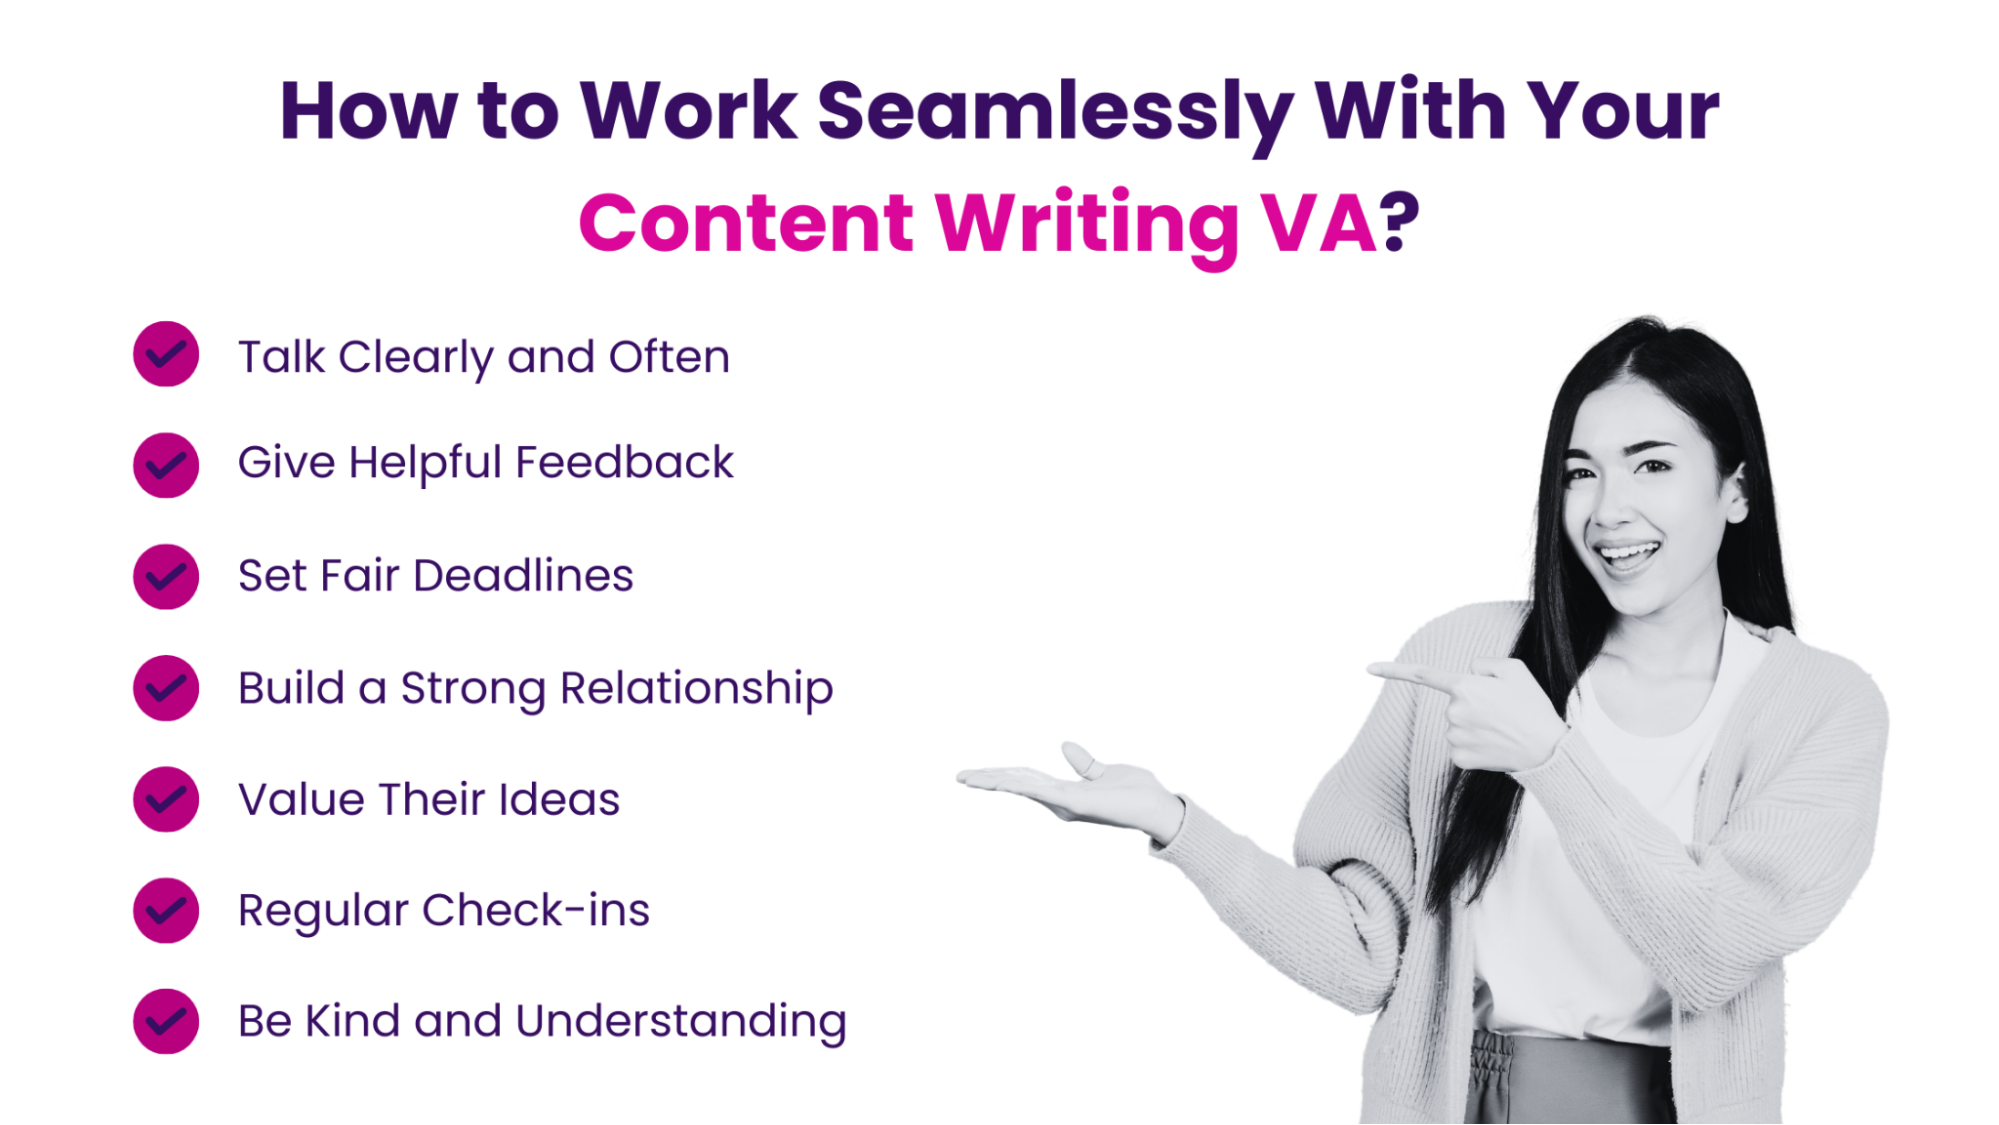 How to work seamlessly with your content writing VA